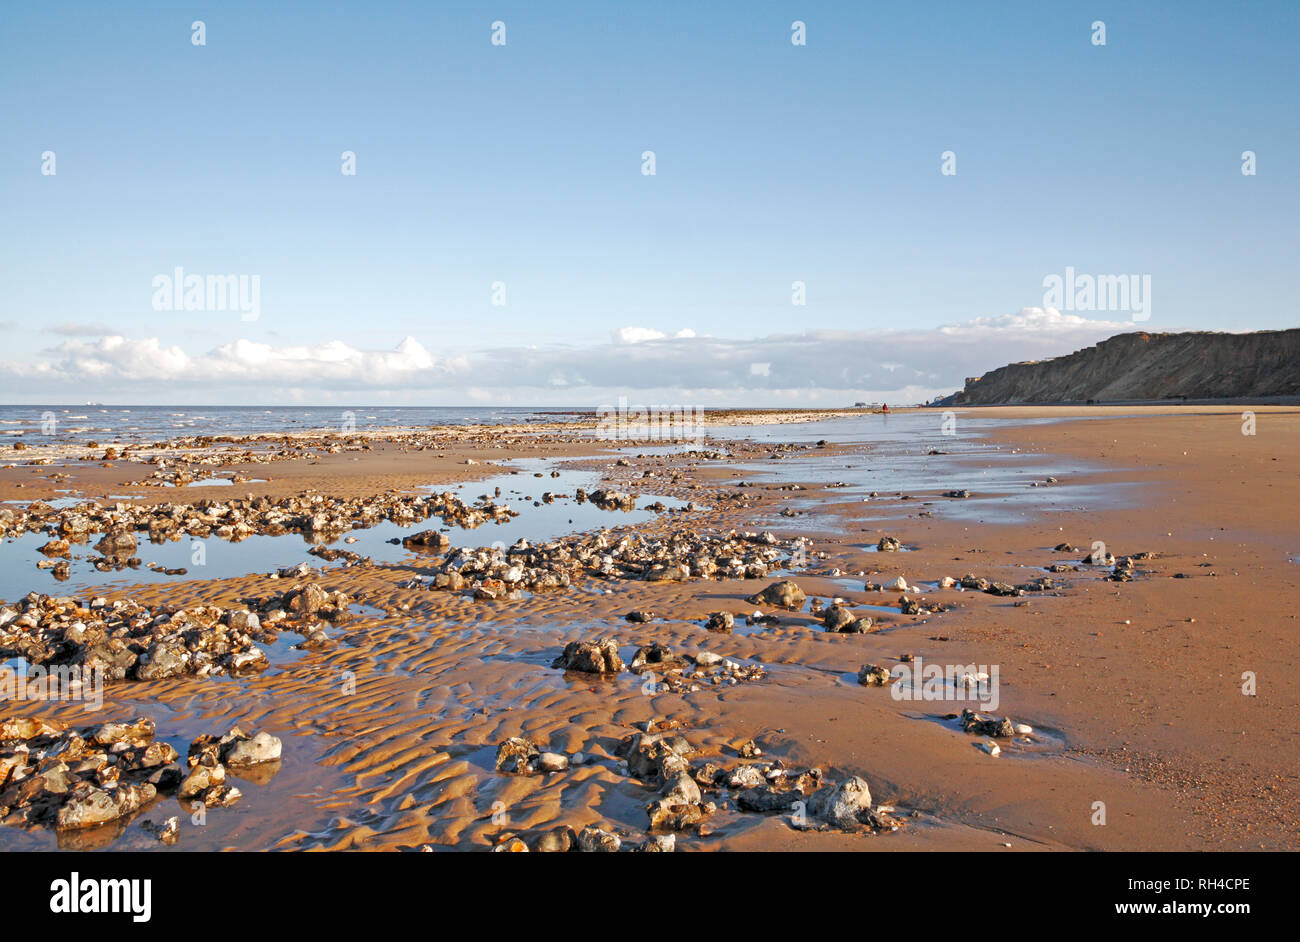 A view along the beach at low tide towards Cromer in North Norfolk from West Runton, Norfolk, England, United Kingdom, Europe. Stock Photo